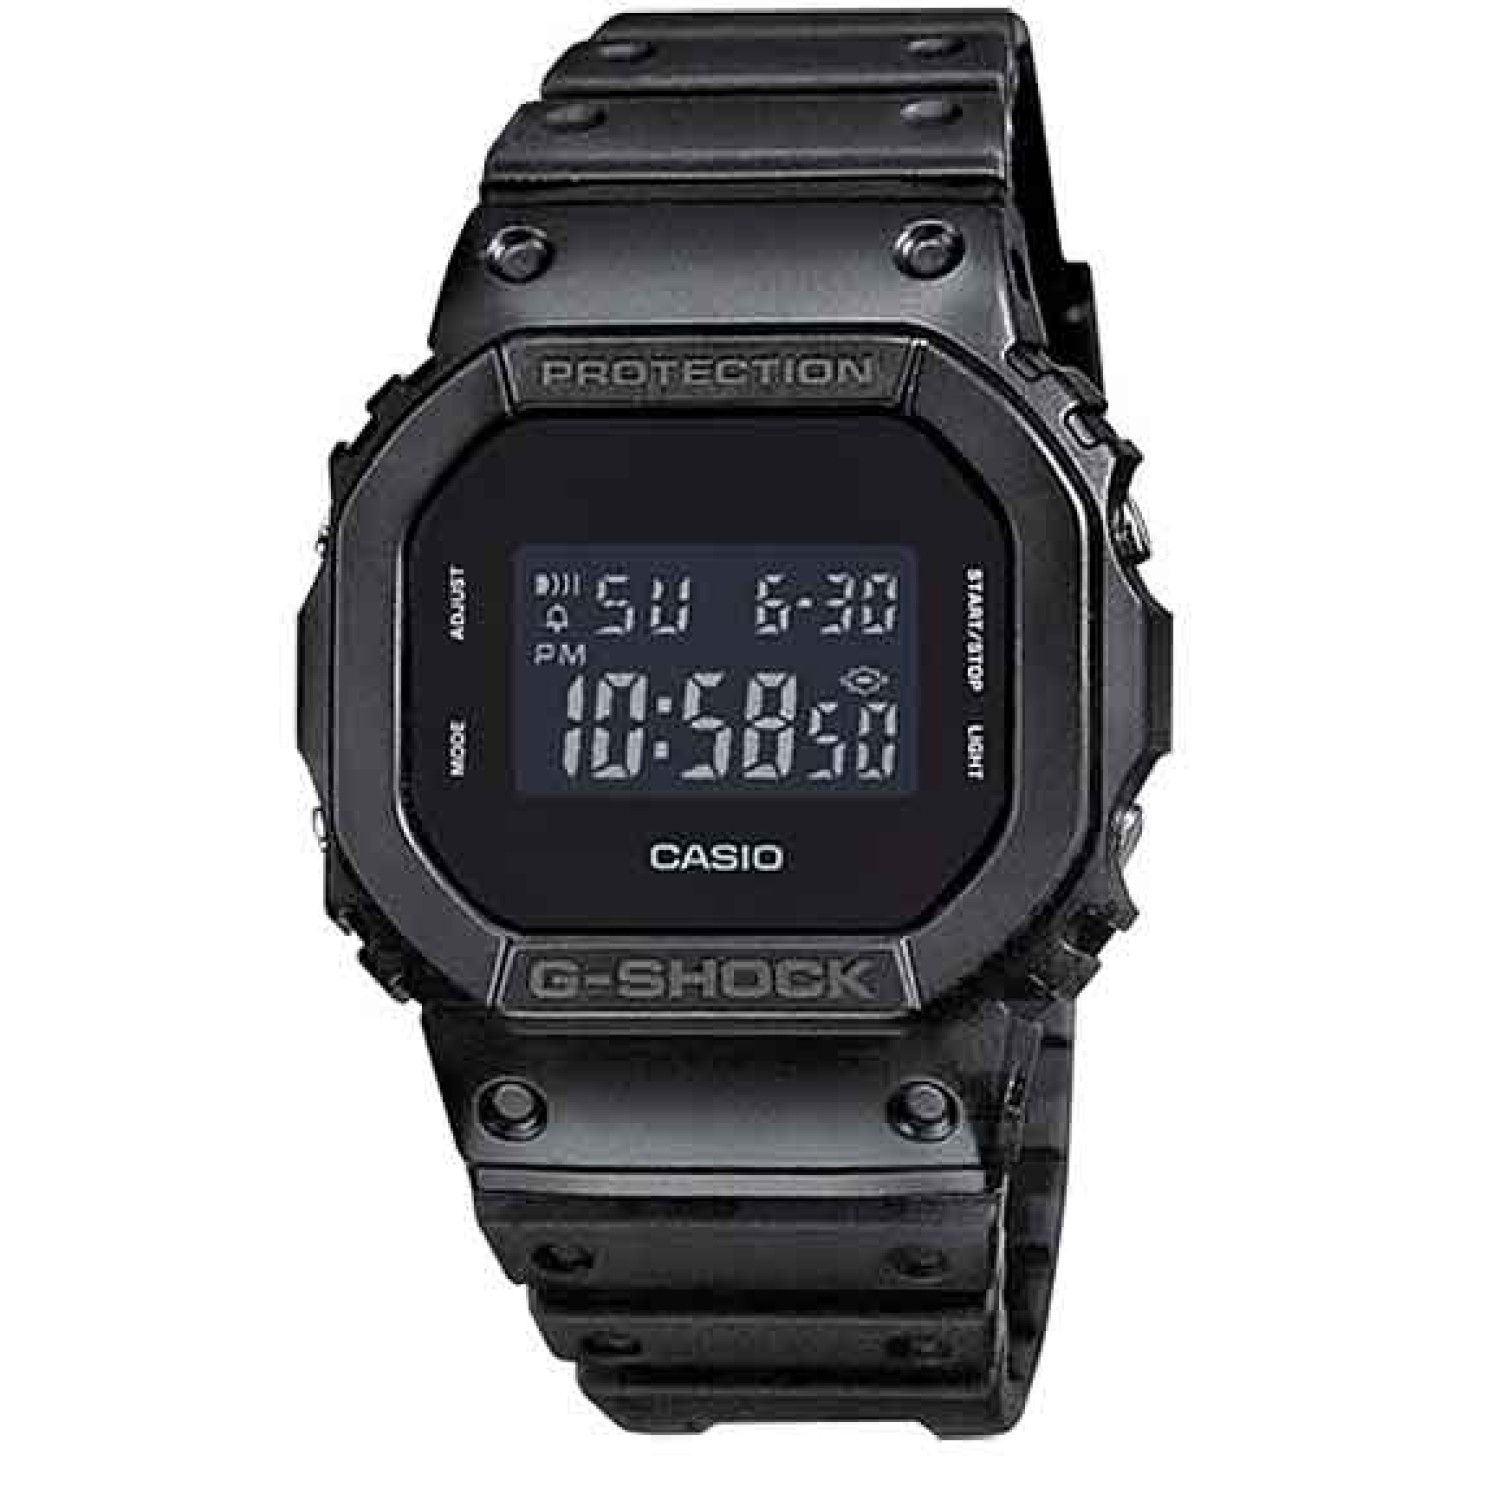 DW5600BB-1D Basic Black Series G-Shock.   Introducing the all-black monotone G-Shock design. The cases and bands of these models are done in a matte finish. 2 Year Casio Guarantee which is only available at authorised New Zealand Casio Stockists @christie